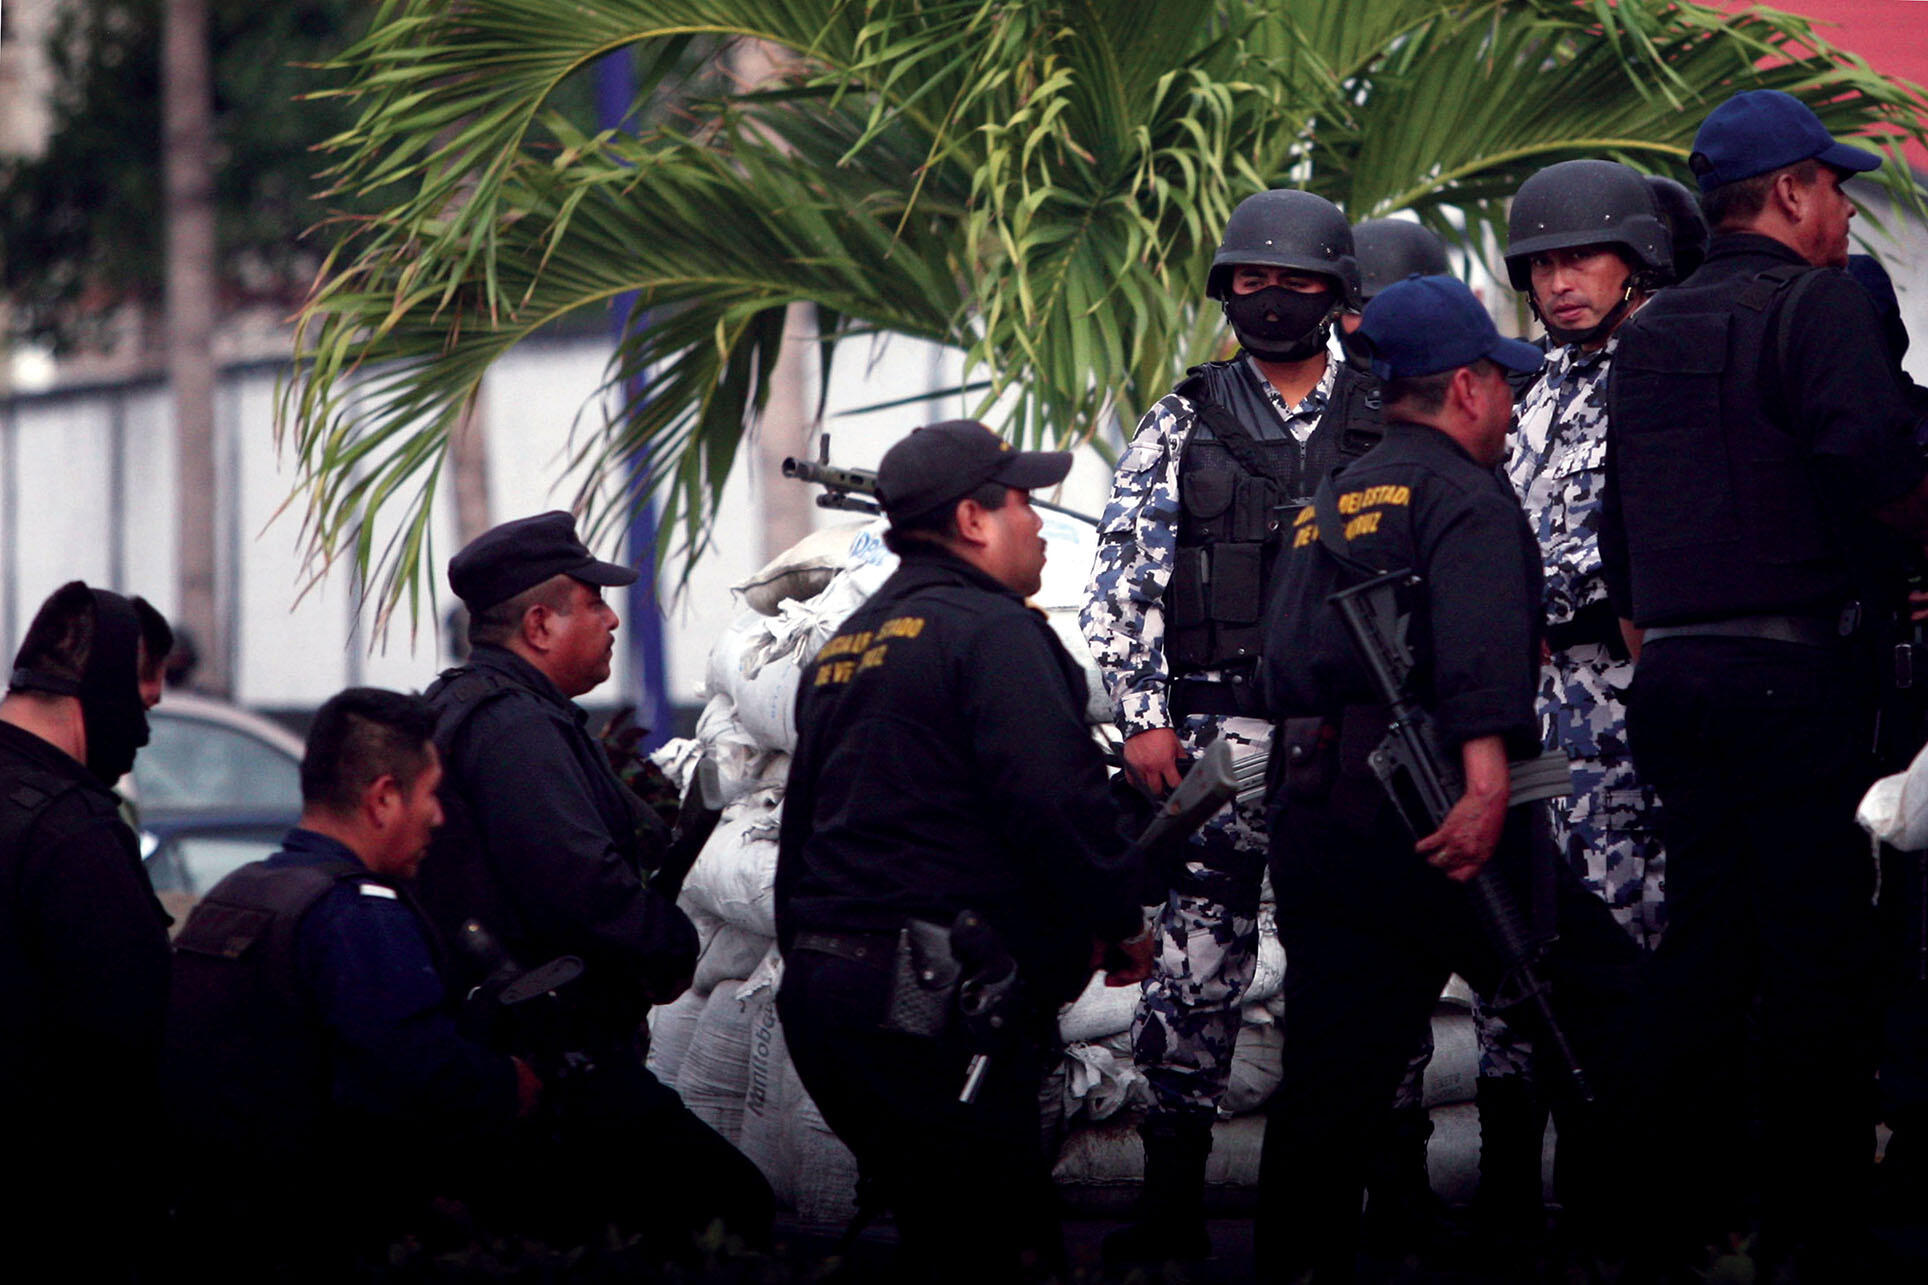 Formers officers walk past Mexican marines, who took over policing in the city of  Veracruz after the entire police force was disbanded in an attempt to root out corruption. (Photo by Felix Marquez, Associated Press.)